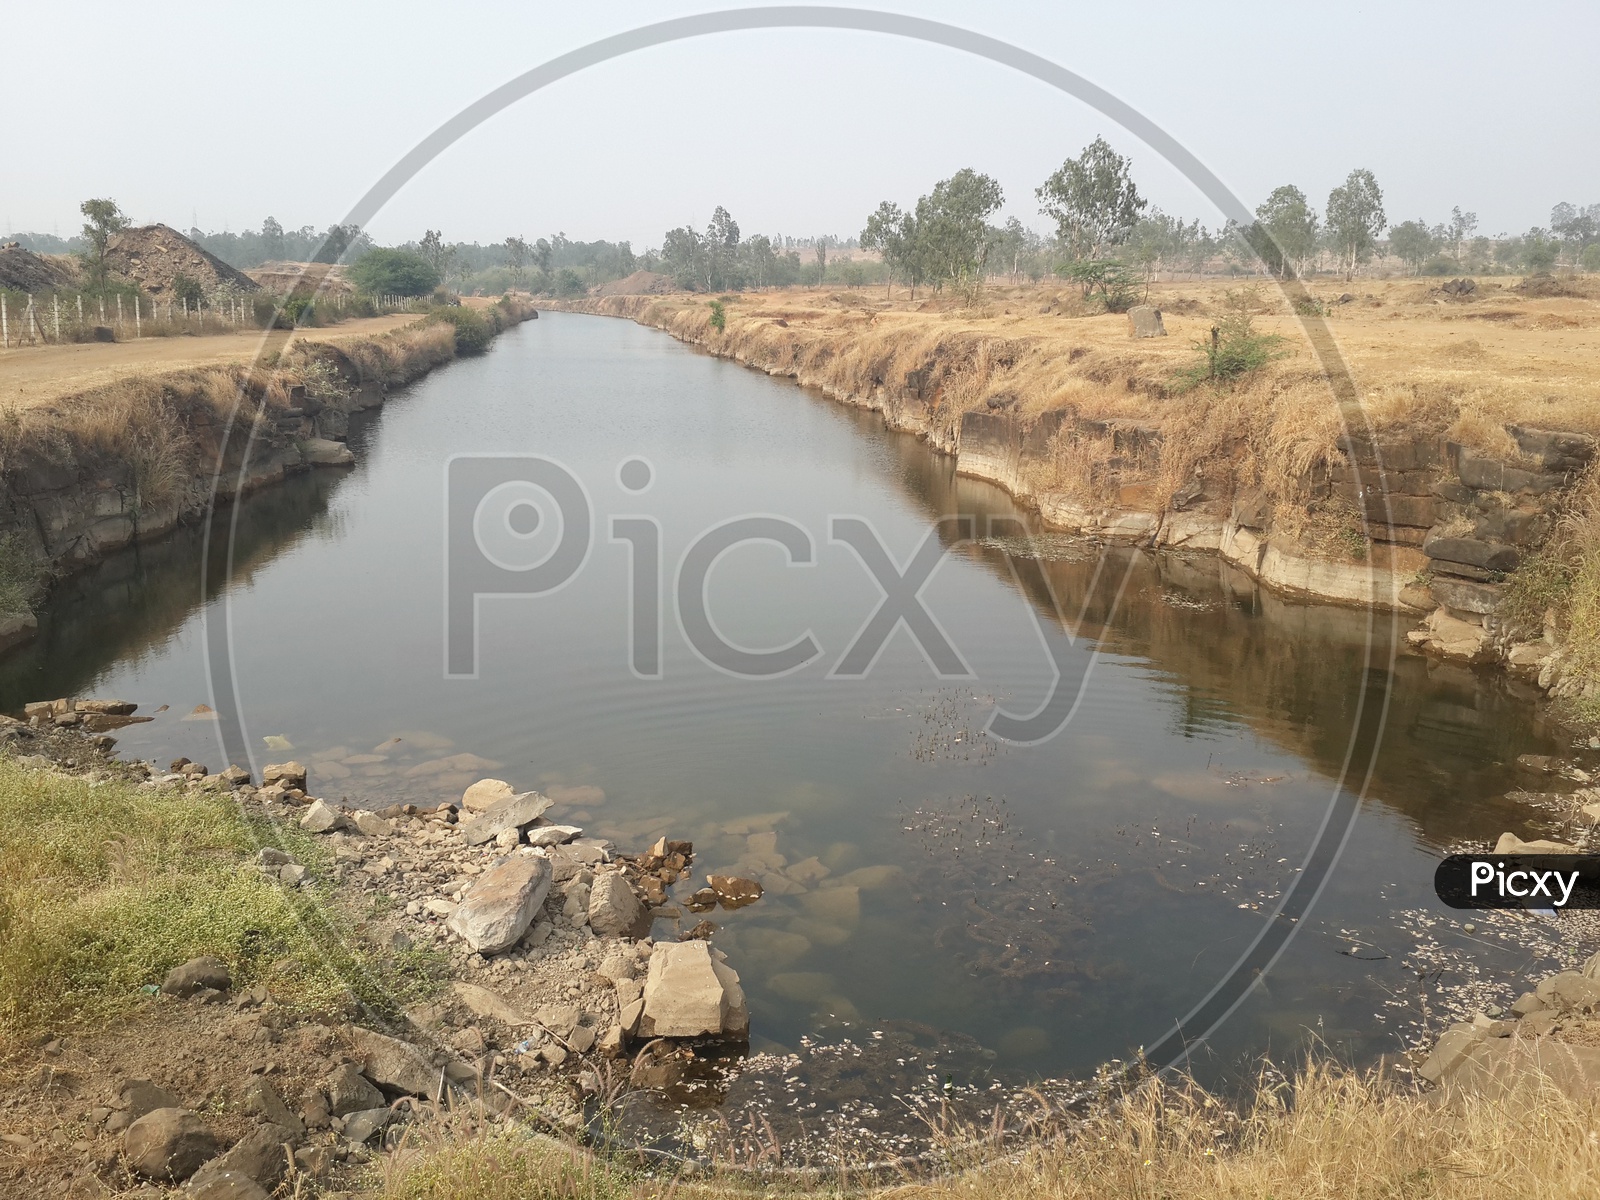 A Water Channel / Canal   In Indian Villages with Water in it